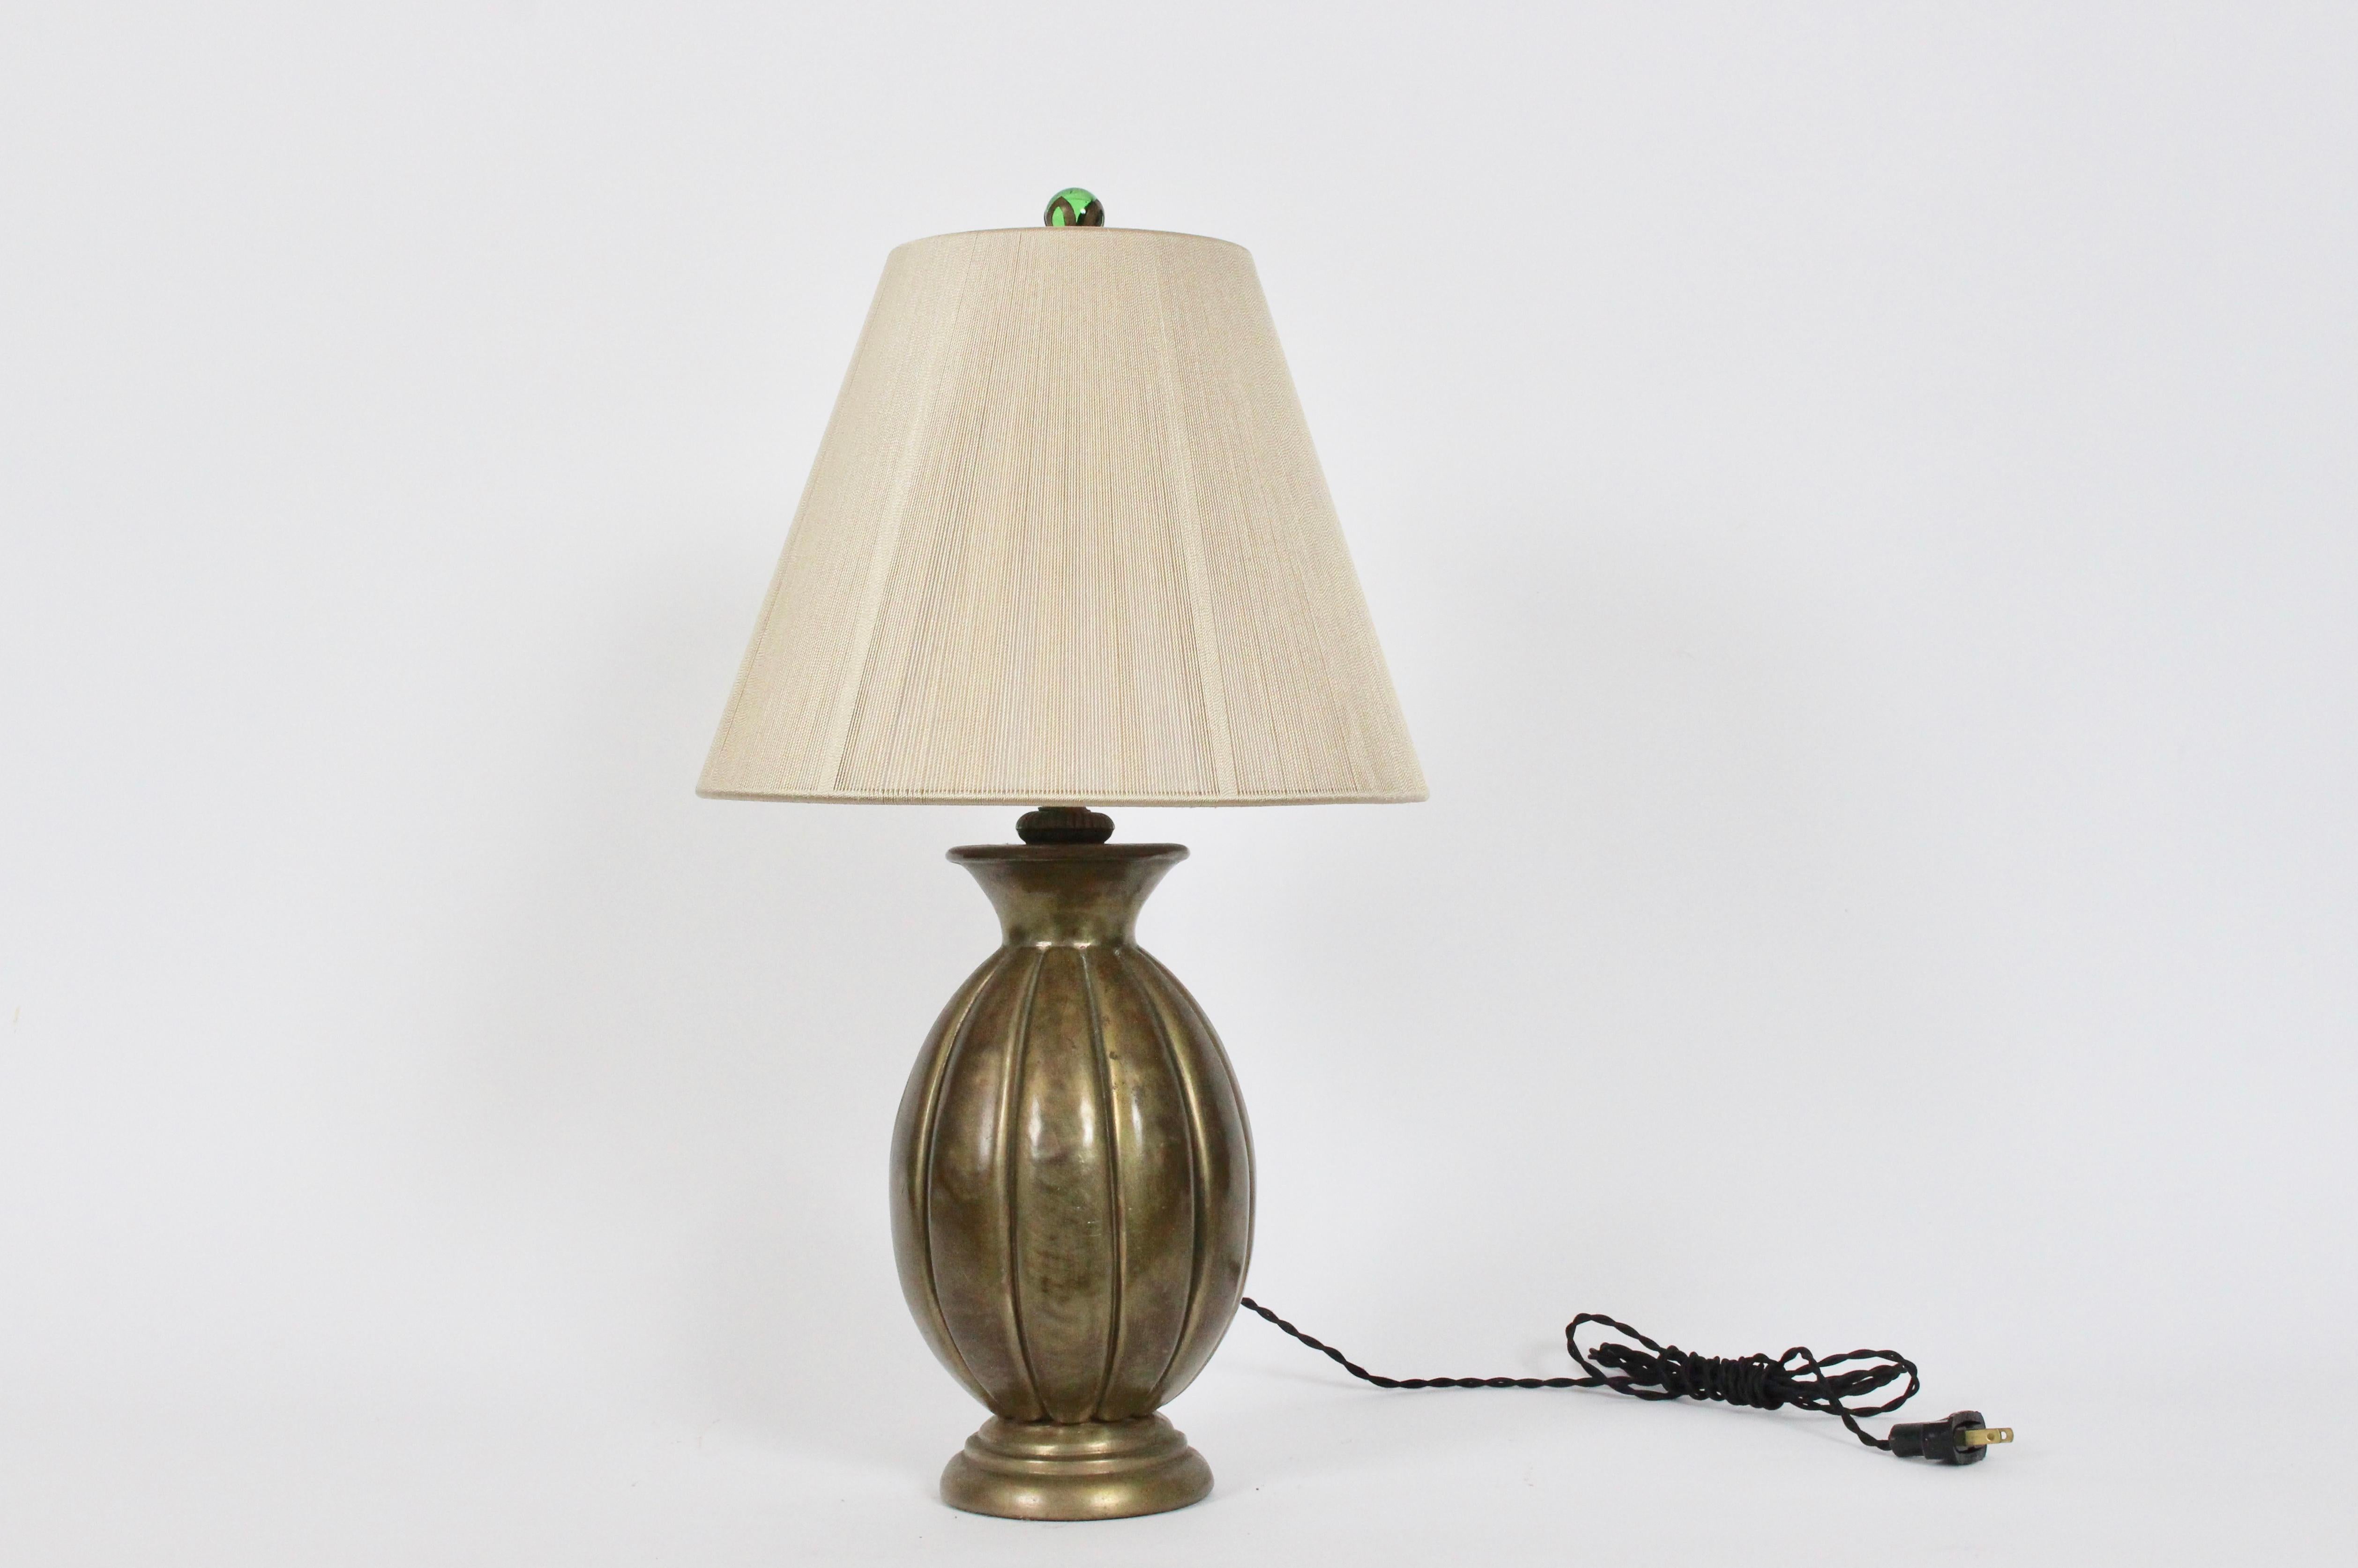 Smaller Just Andersen style all bronze bedside table lamp, 1940's. Heavy cast Bronze bottle form with smooth ribbed detail and nice vintage patina on circular base. With original translucent Green Glass ball Finial. Lampshade shown for display only